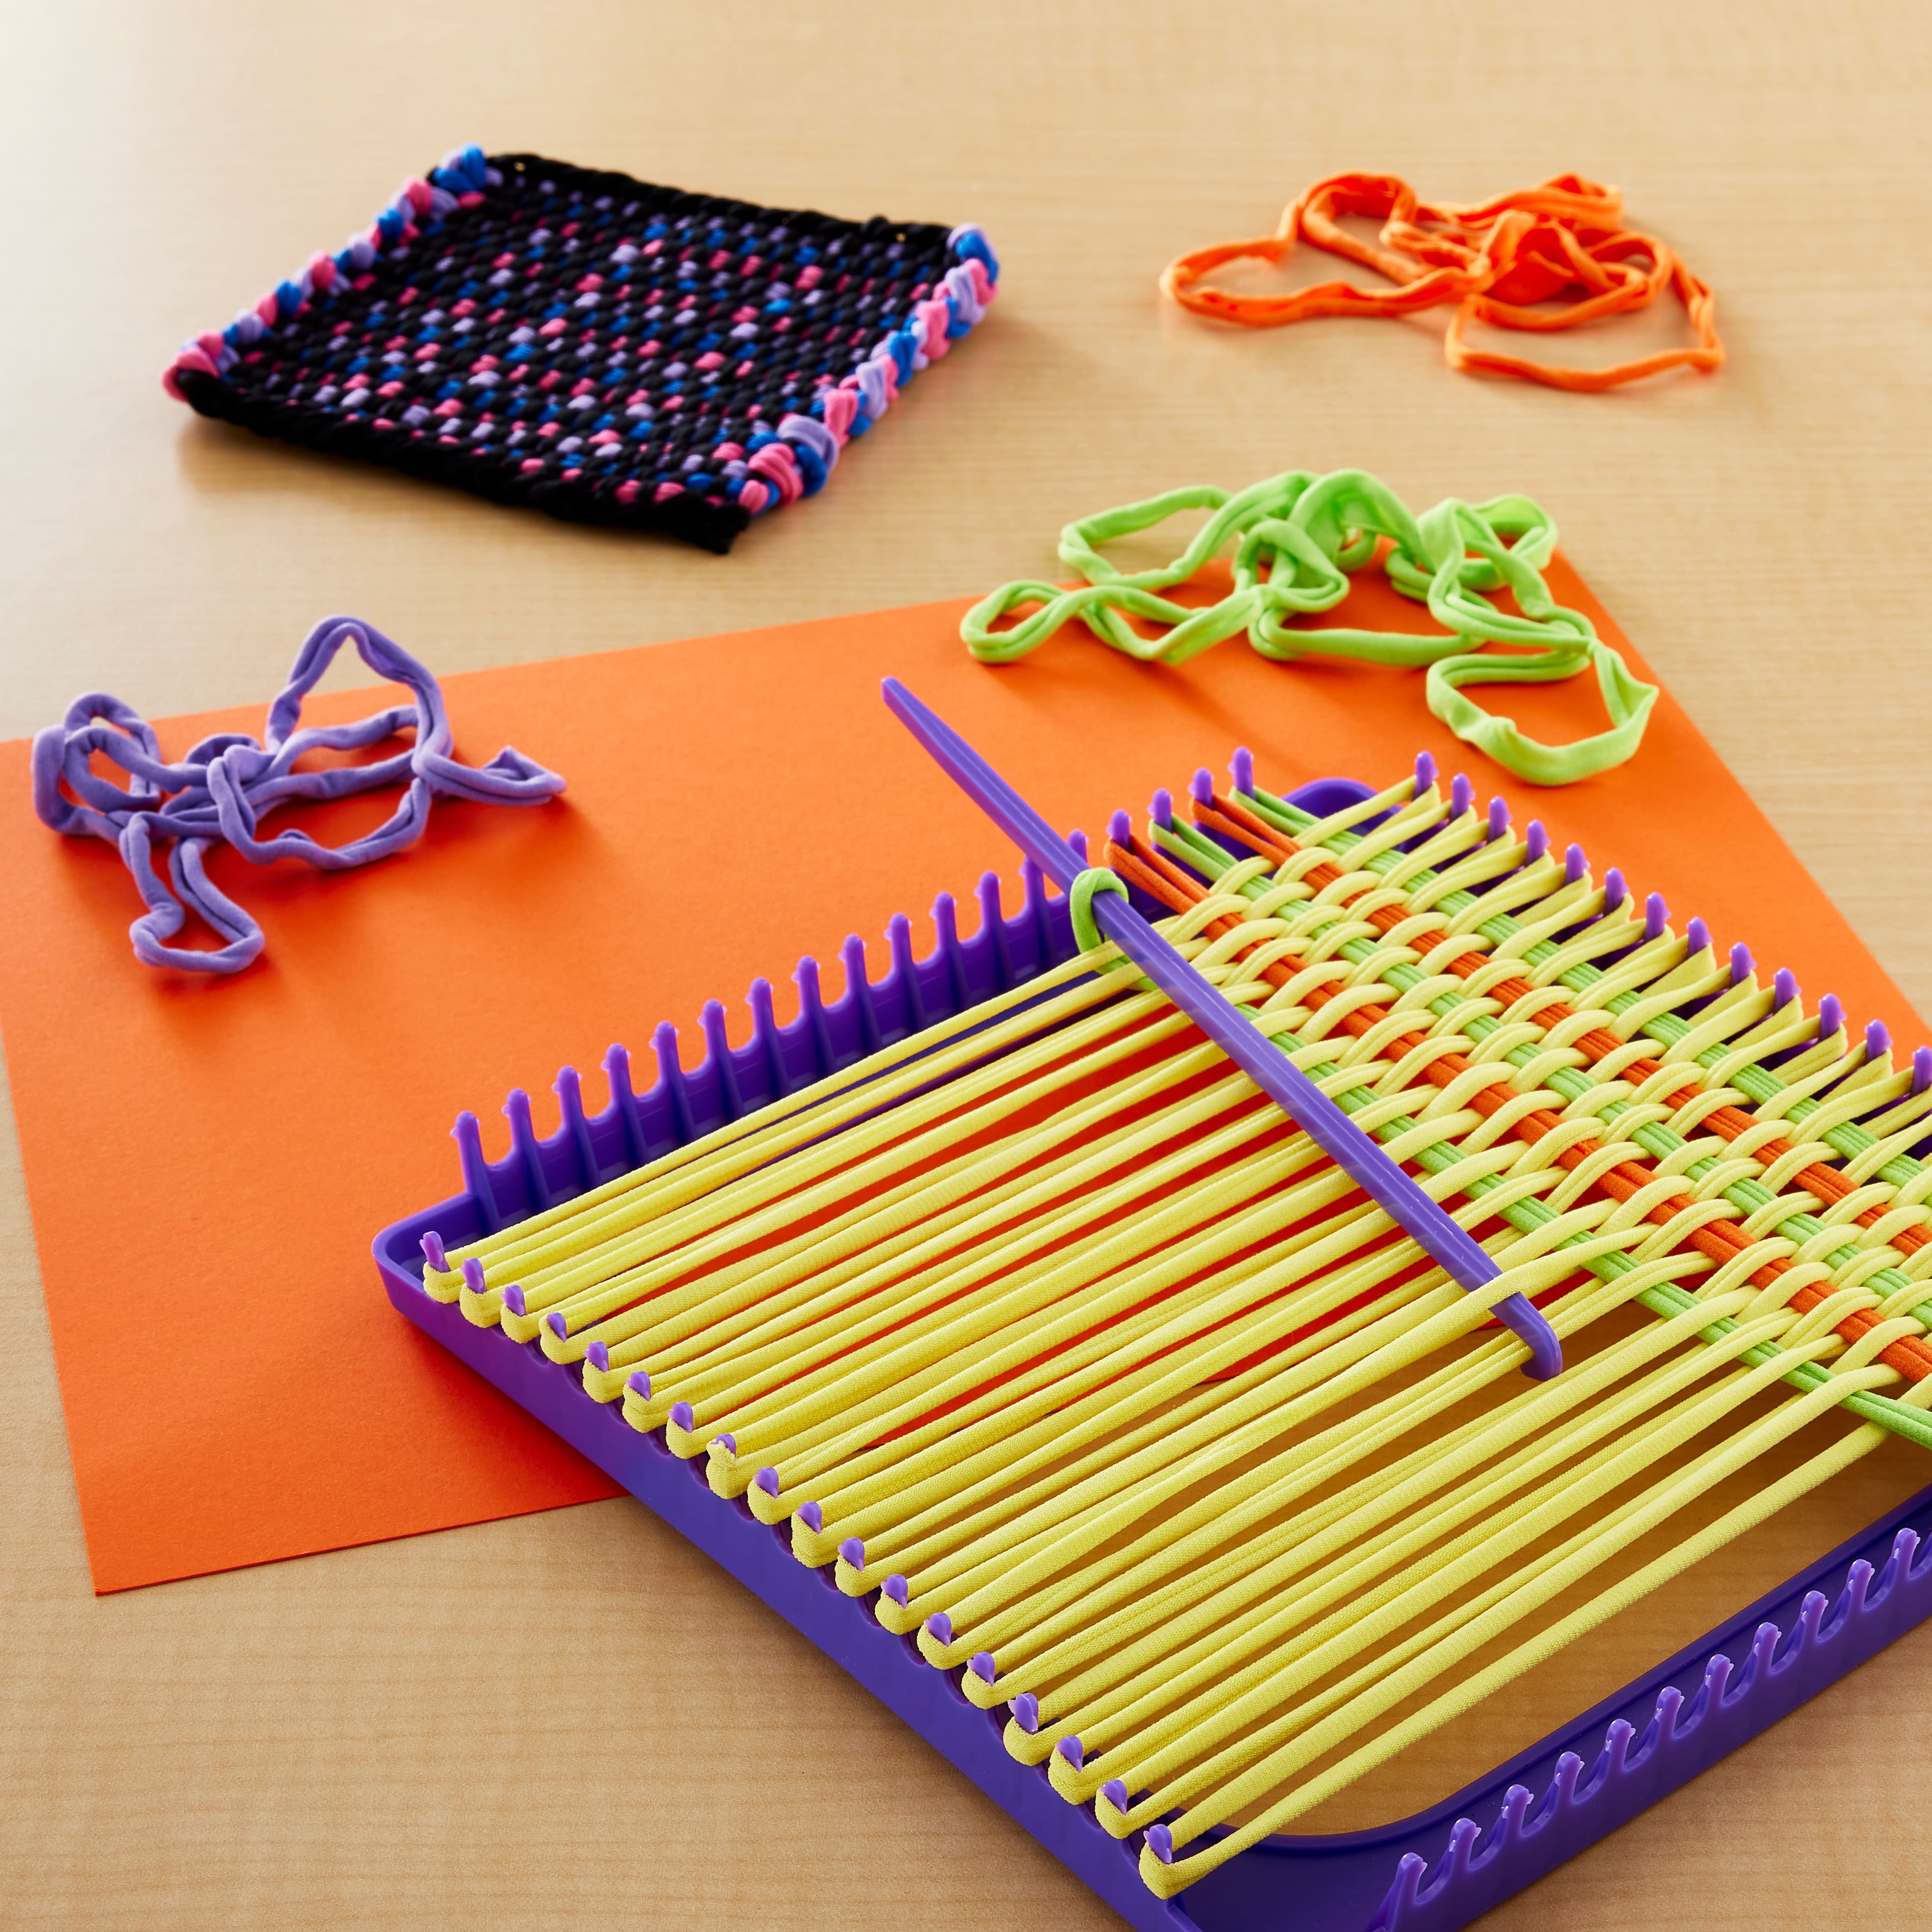 How To: Weaving Loom for Kids